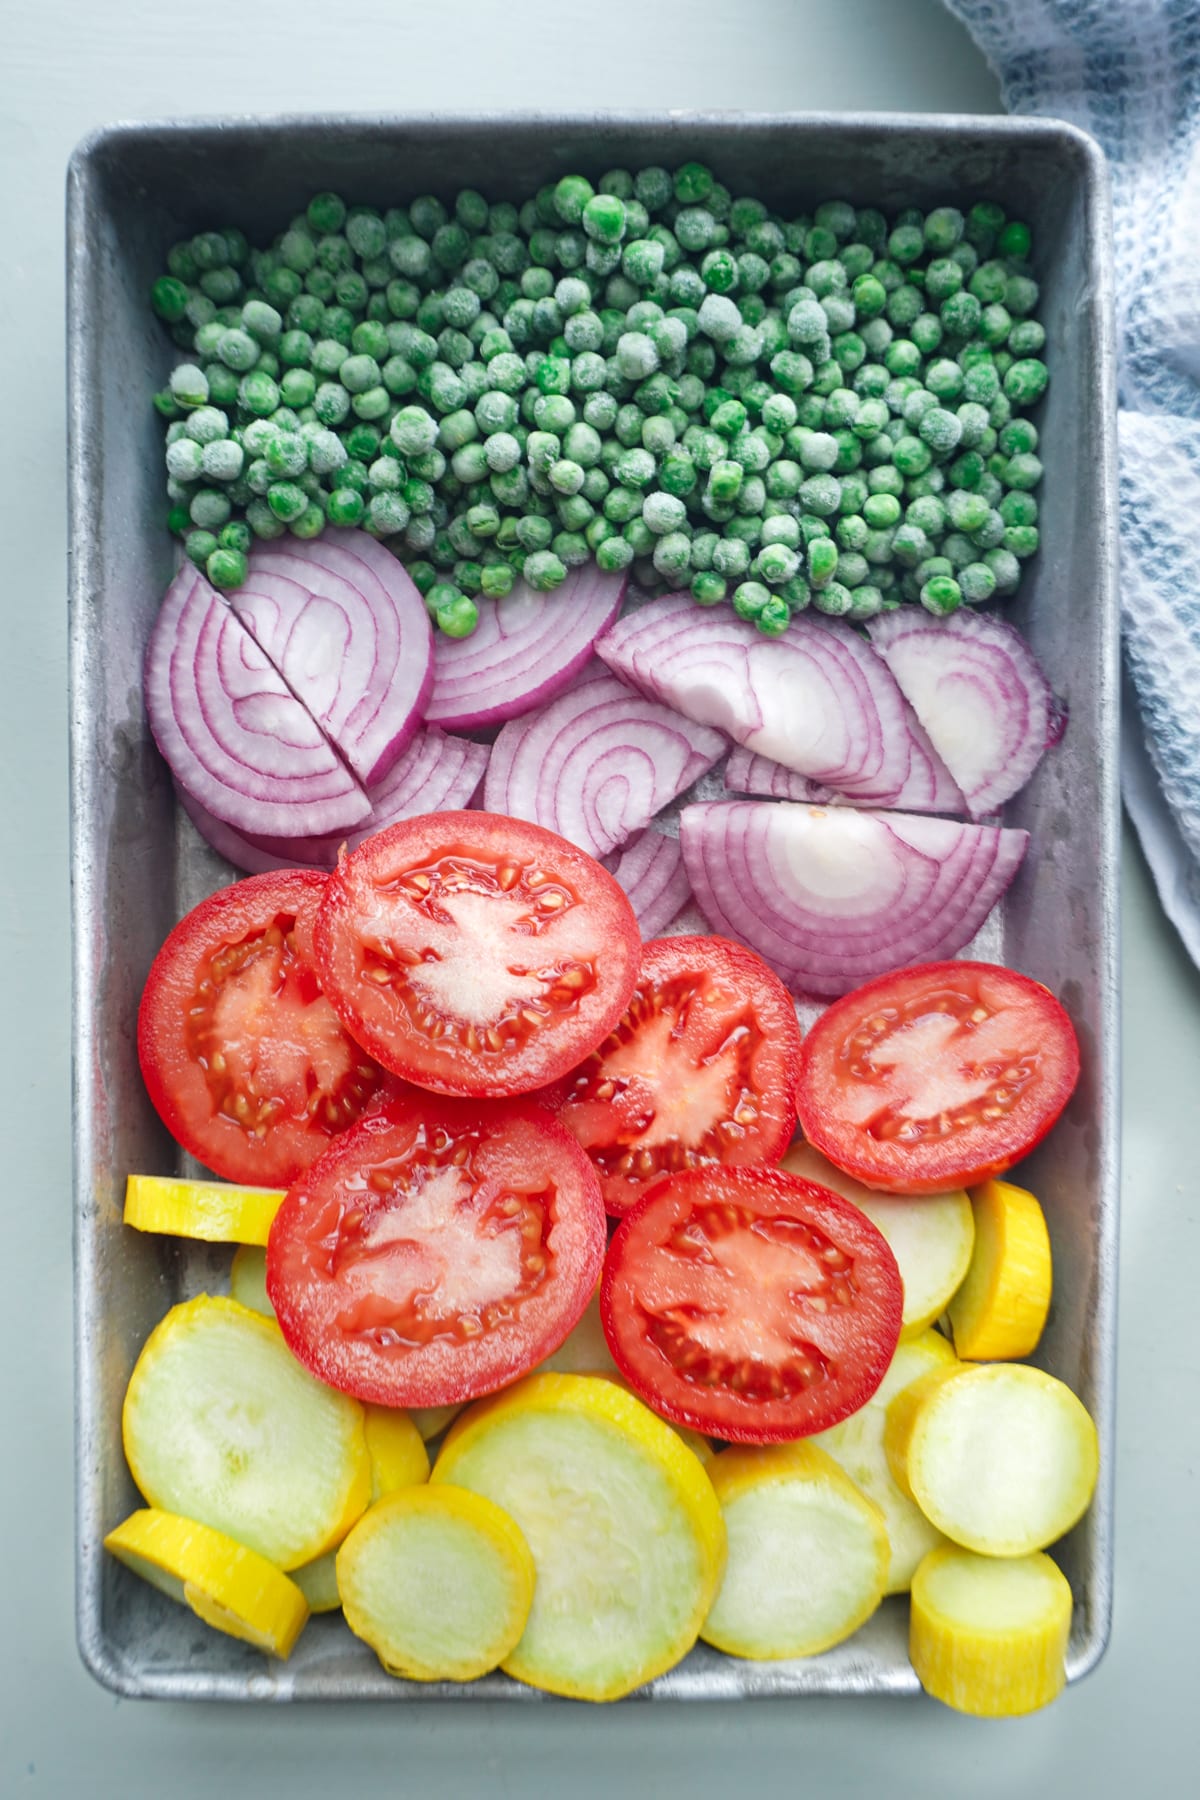 squash, tomatoes, onions, and peas in a baking pan